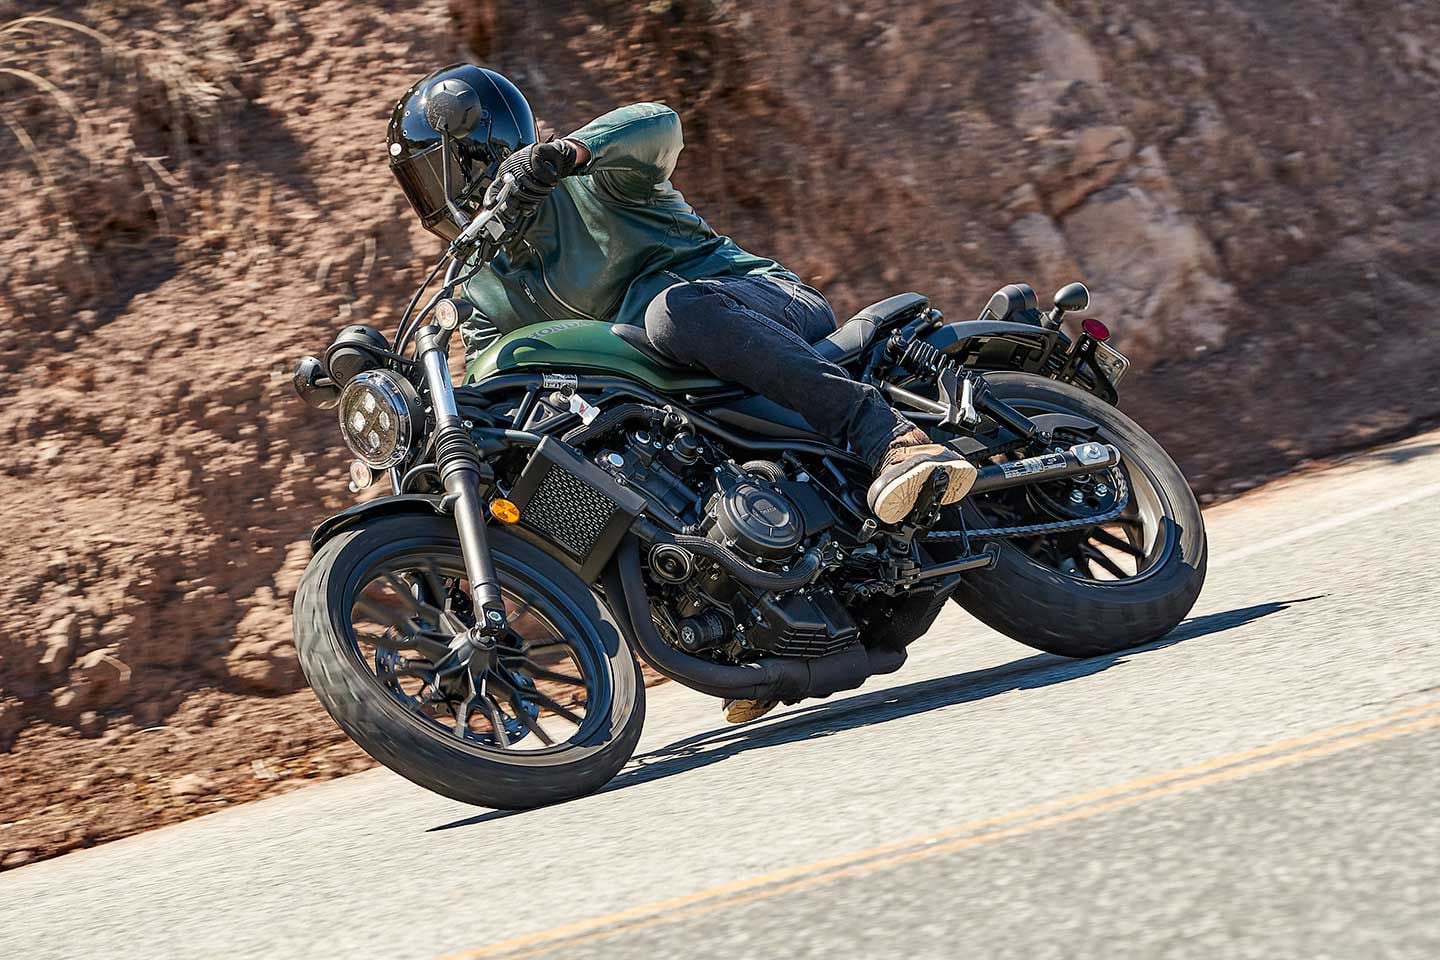 Lightweight, nimble handling and a stable chassis make the SCL500 a fun bike to ride through the canyons, but soft suspension keeps you from getting too aggressive.